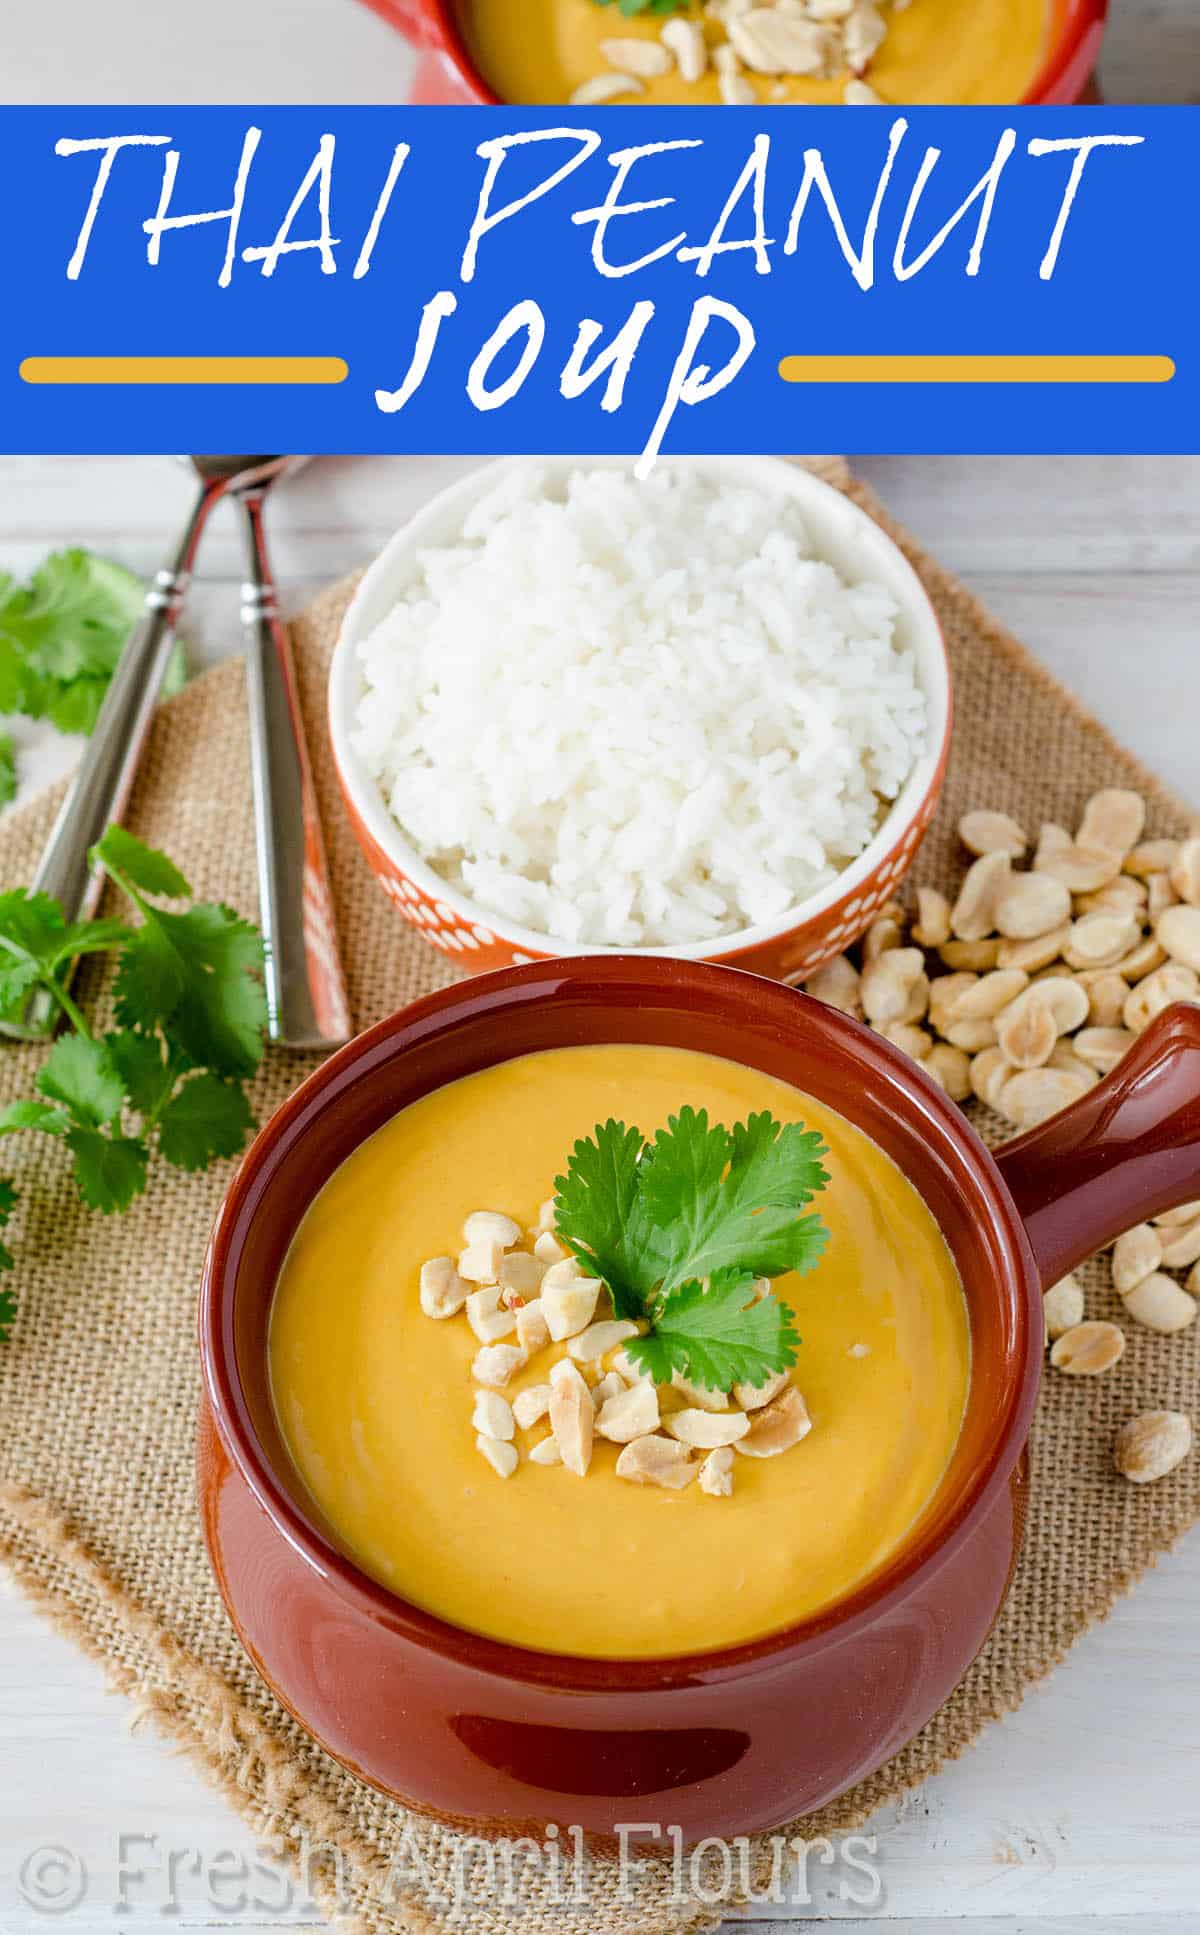 Thai Peanut Soup: Nutty and flavorful soup, filled with lots of veggies, a little bit of heat, and all of the flavors you love about Thai food. Serve over rice, add some meat, or add noodles to make this suit your meal needs and tastebuds. via @frshaprilflours